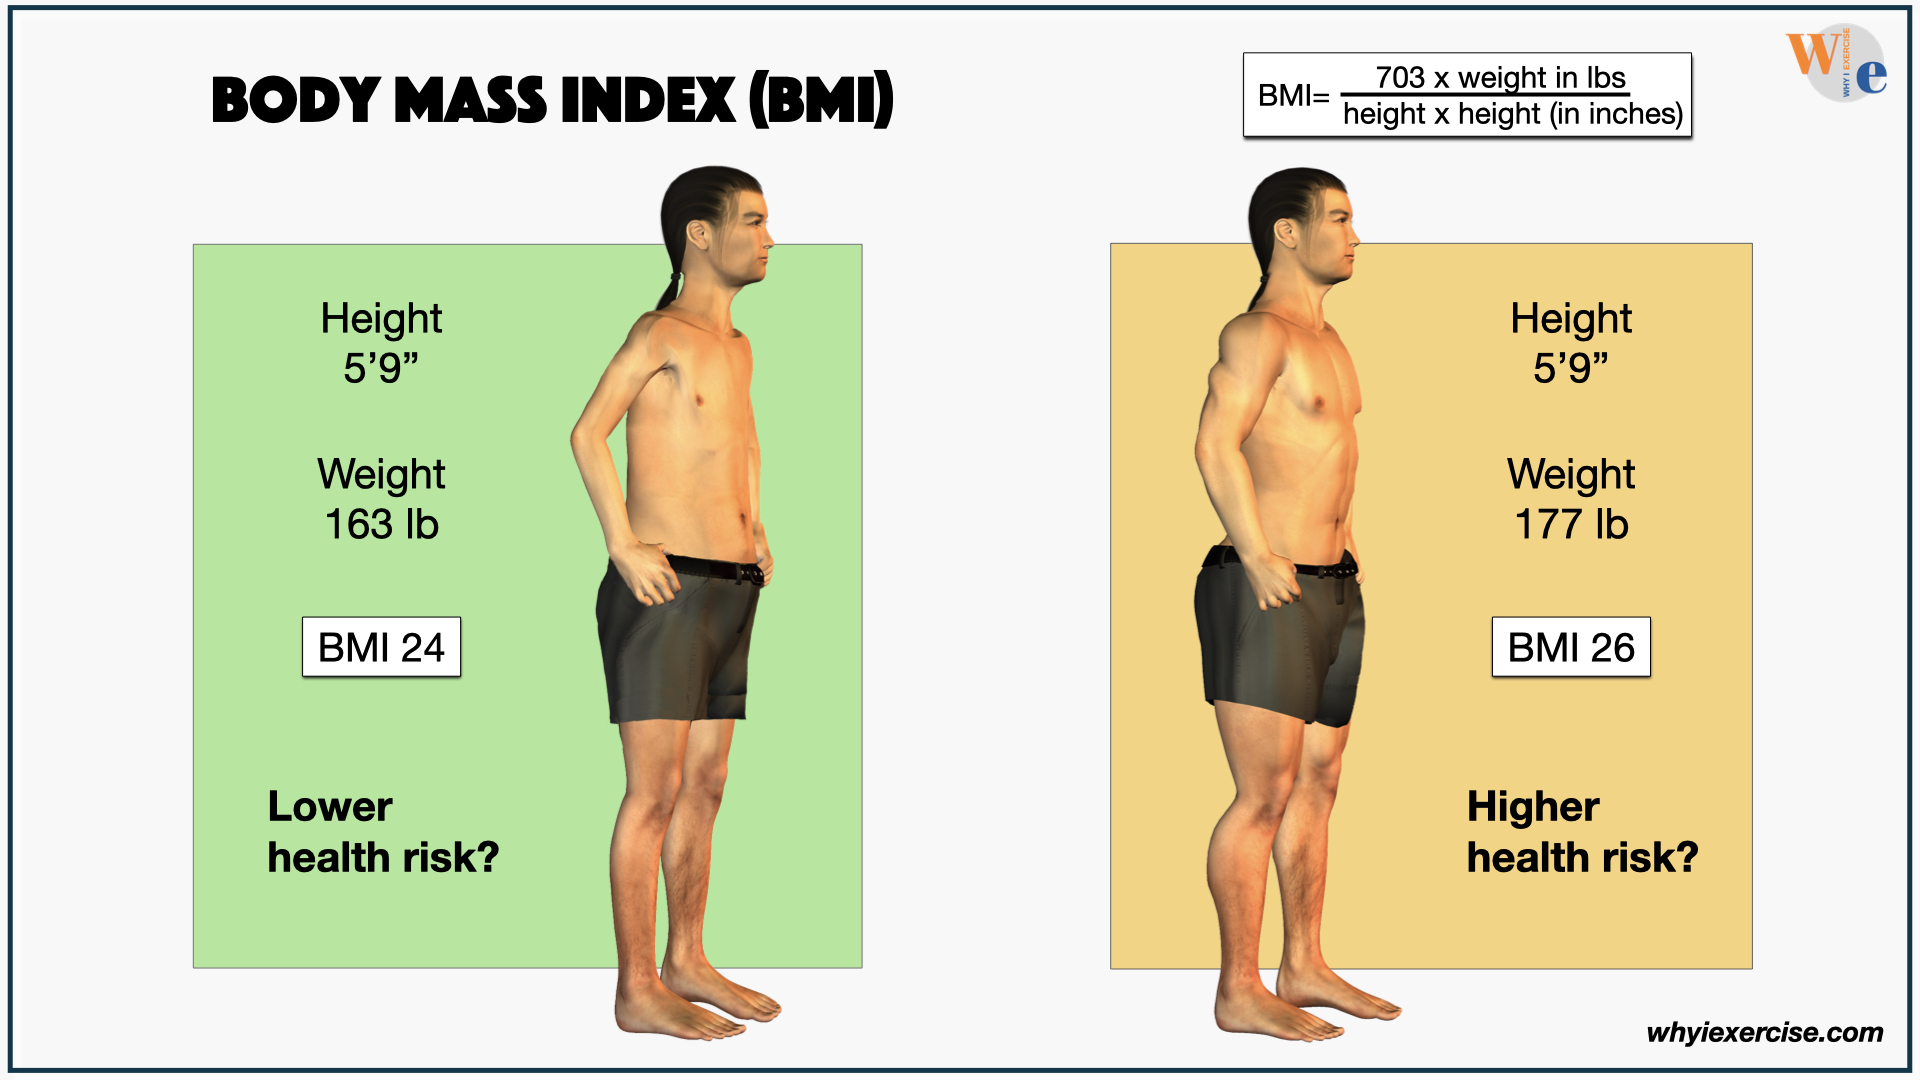 https://www.whyiexercise.com/images/overweight-muscular-or-normal-weight-for-health.jpg